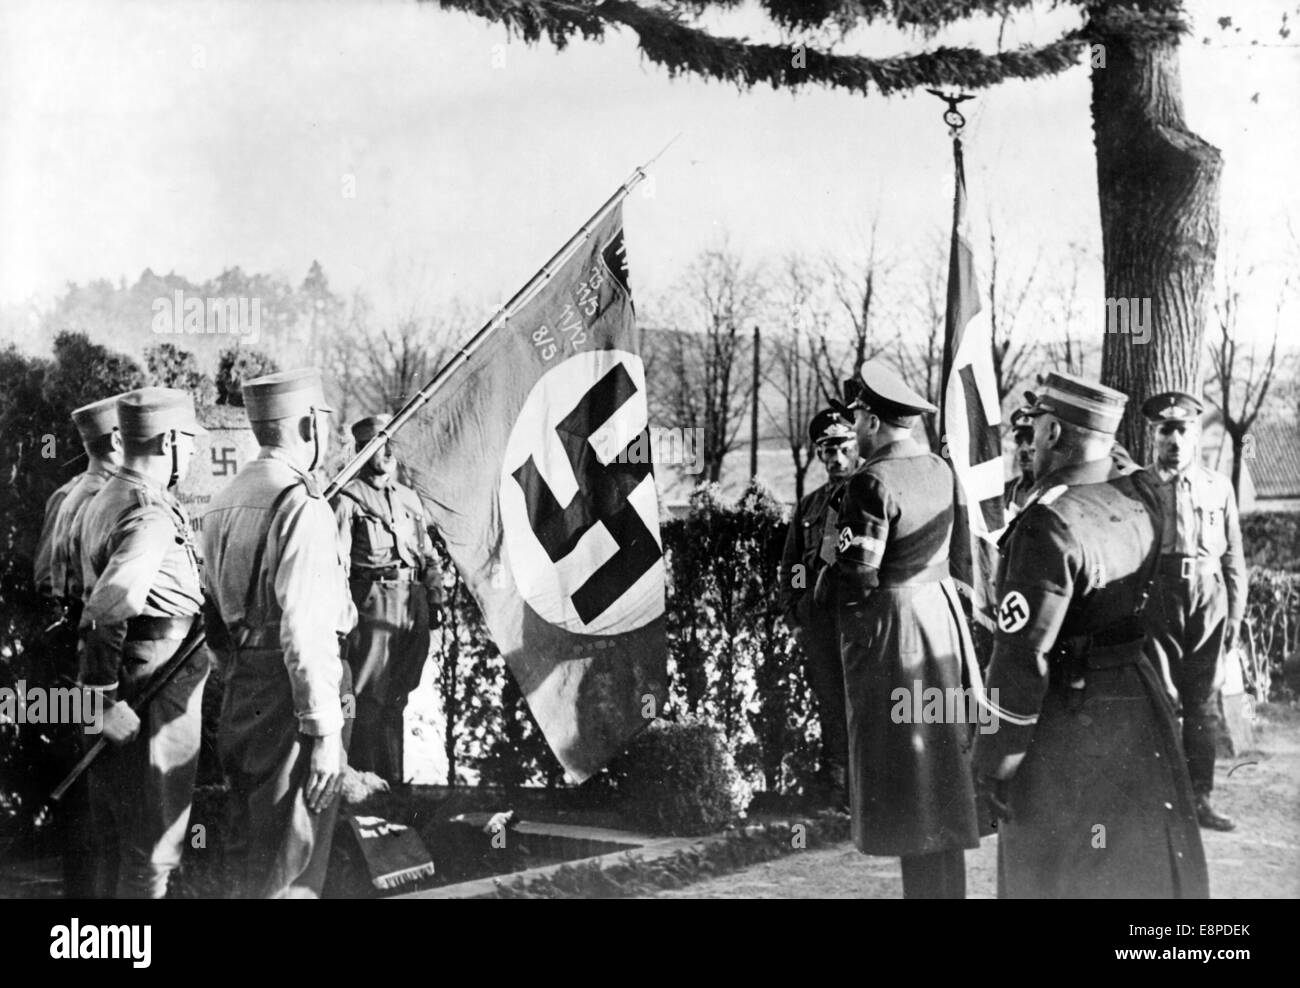 The Nazi propaganda picture shows Gauleiter of Danzig Albert Forster during a wreath laying ceremony at the Horst Hoffmann memorial, who was killed during the street fighting between the Nazis and the Social Democrats at the beginning of the 1930s, in Danzig, Poland, date unknown (1933-1945). Photo: Berliner Archive - NO WIRE SERVICE Stock Photo